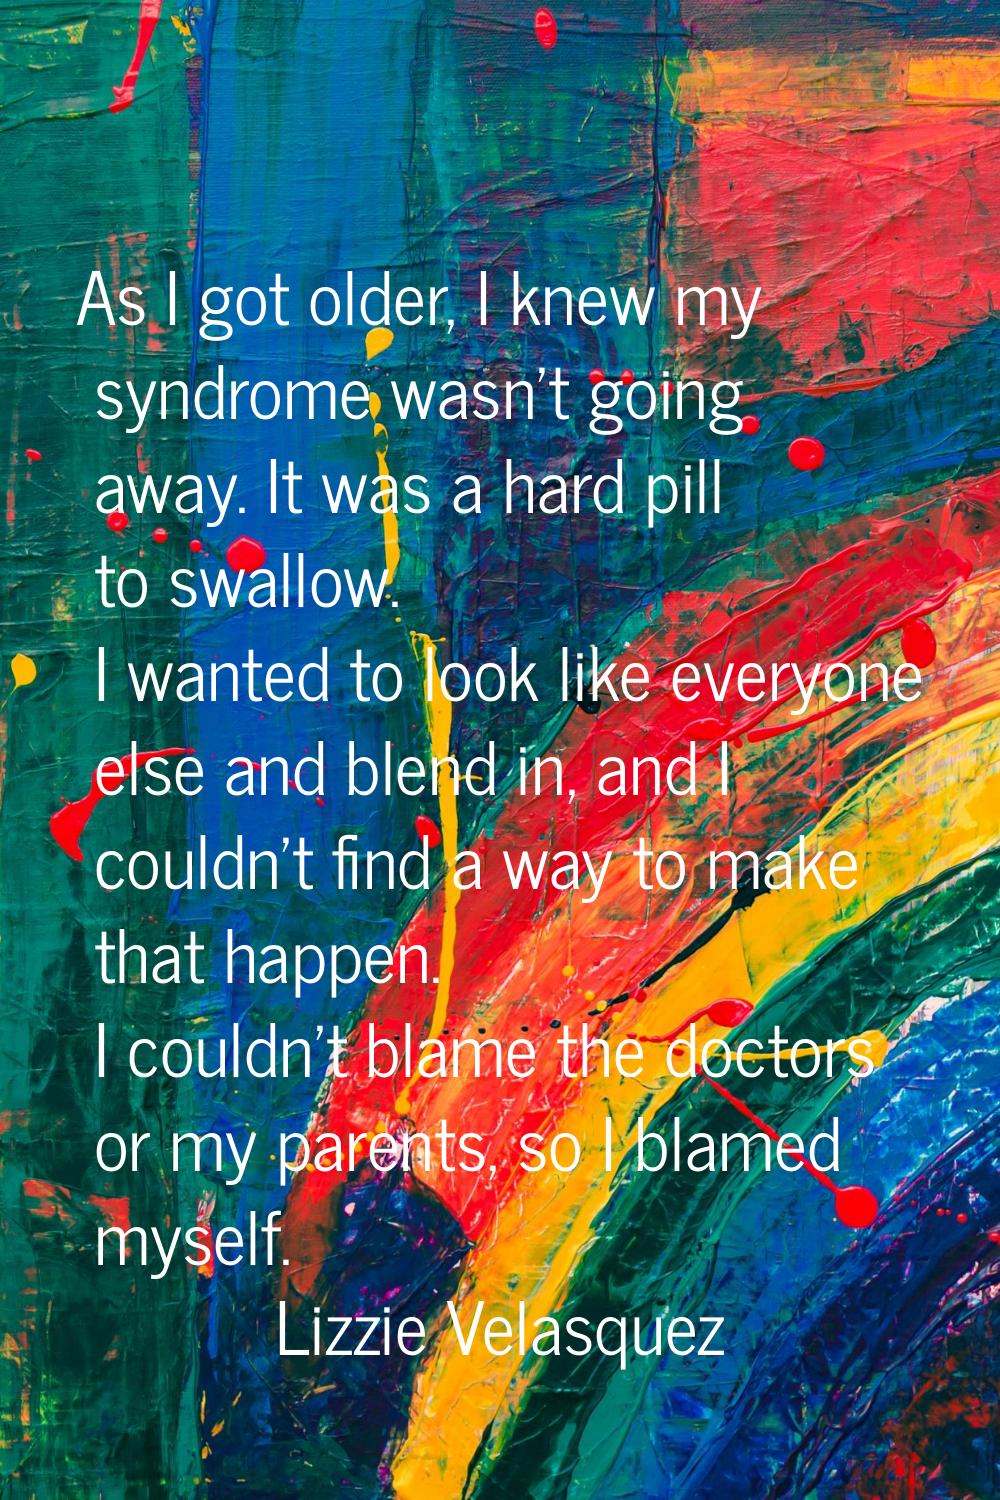 As I got older, I knew my syndrome wasn't going away. It was a hard pill to swallow. I wanted to lo